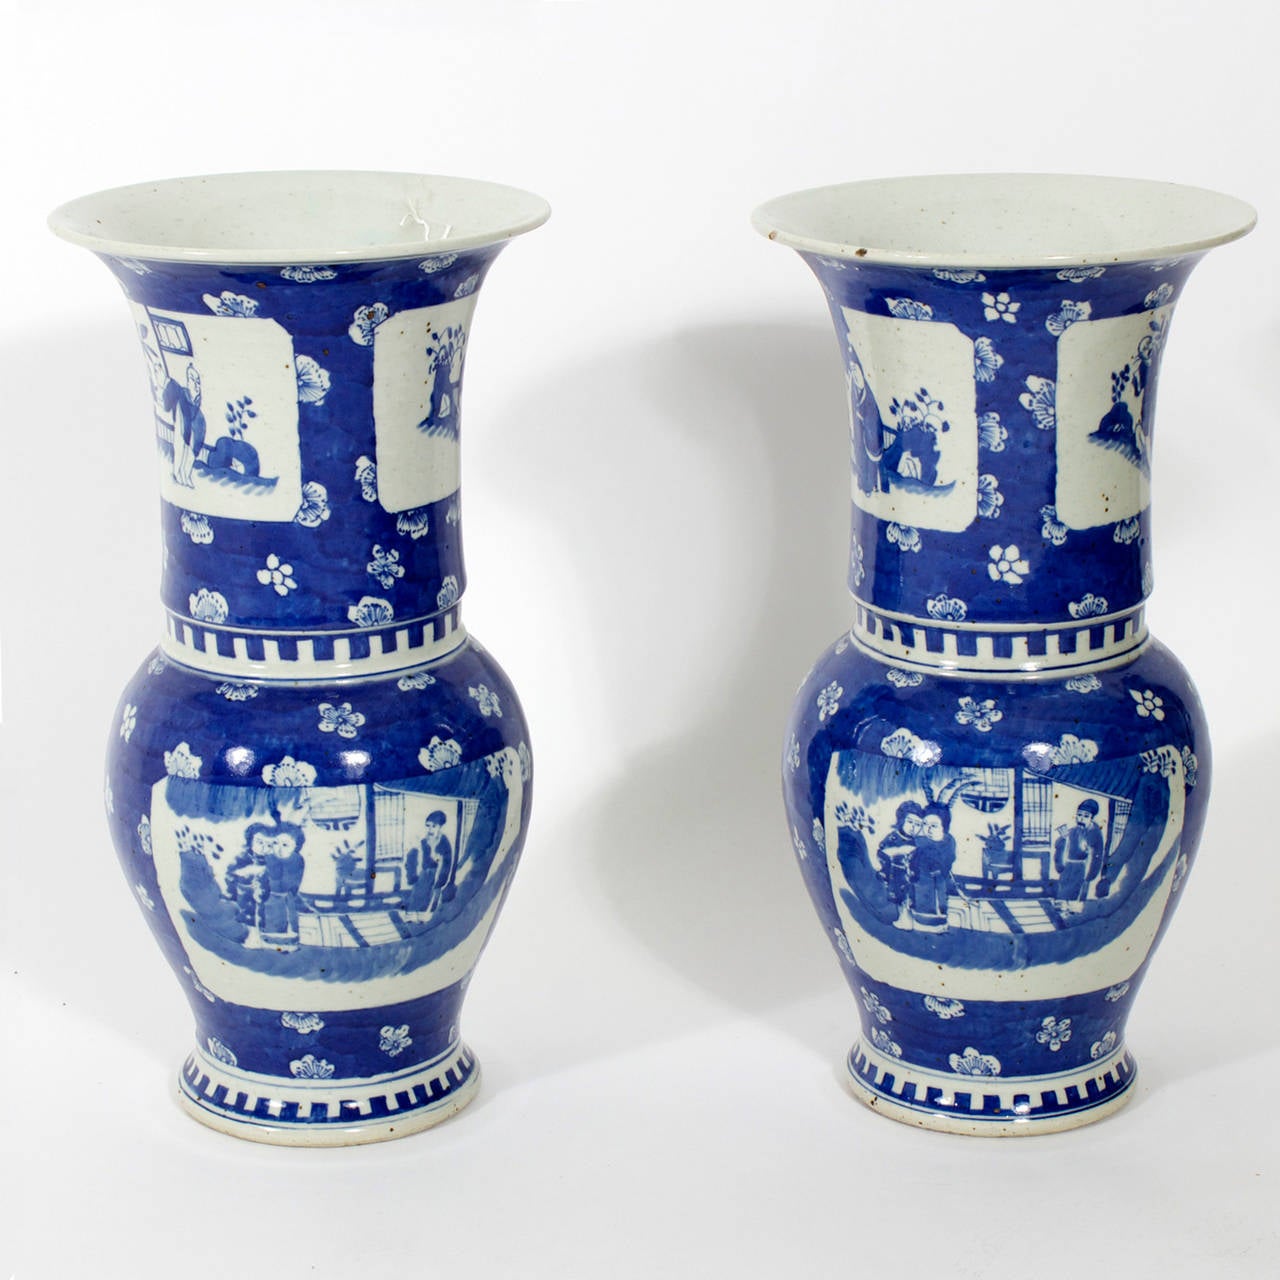 A pair of Chinese export blue and white vases with scene motif cartouches, on a cherry blossom or prunus background. Nice form.